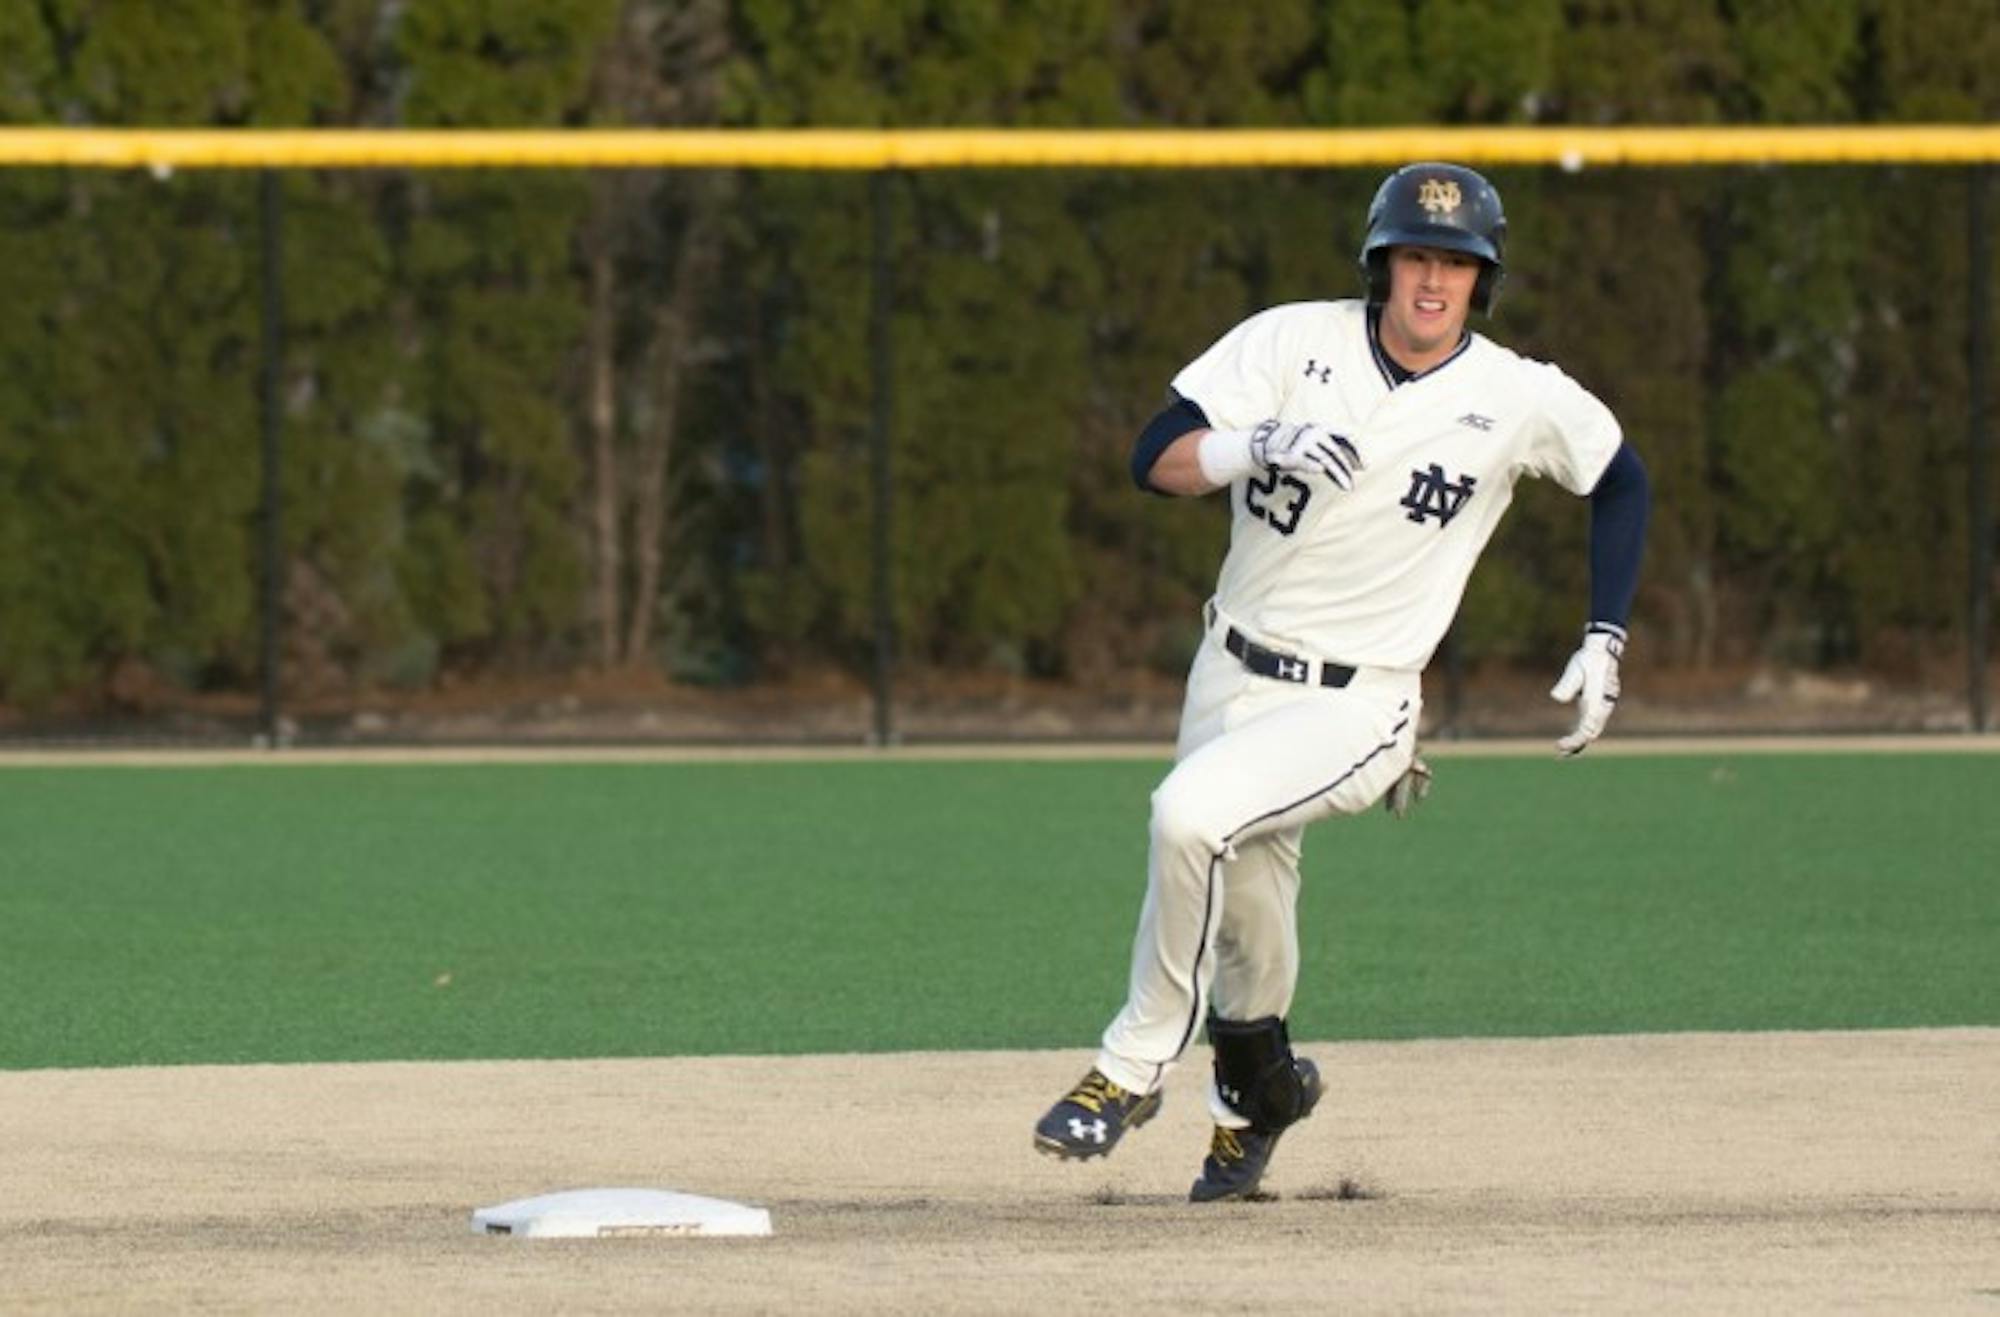 Junior second baseman Cavan Biggio rounds second base during Notre Dame’s 9-5 victory over UIC on March 22 at Frank Eck Stadium.